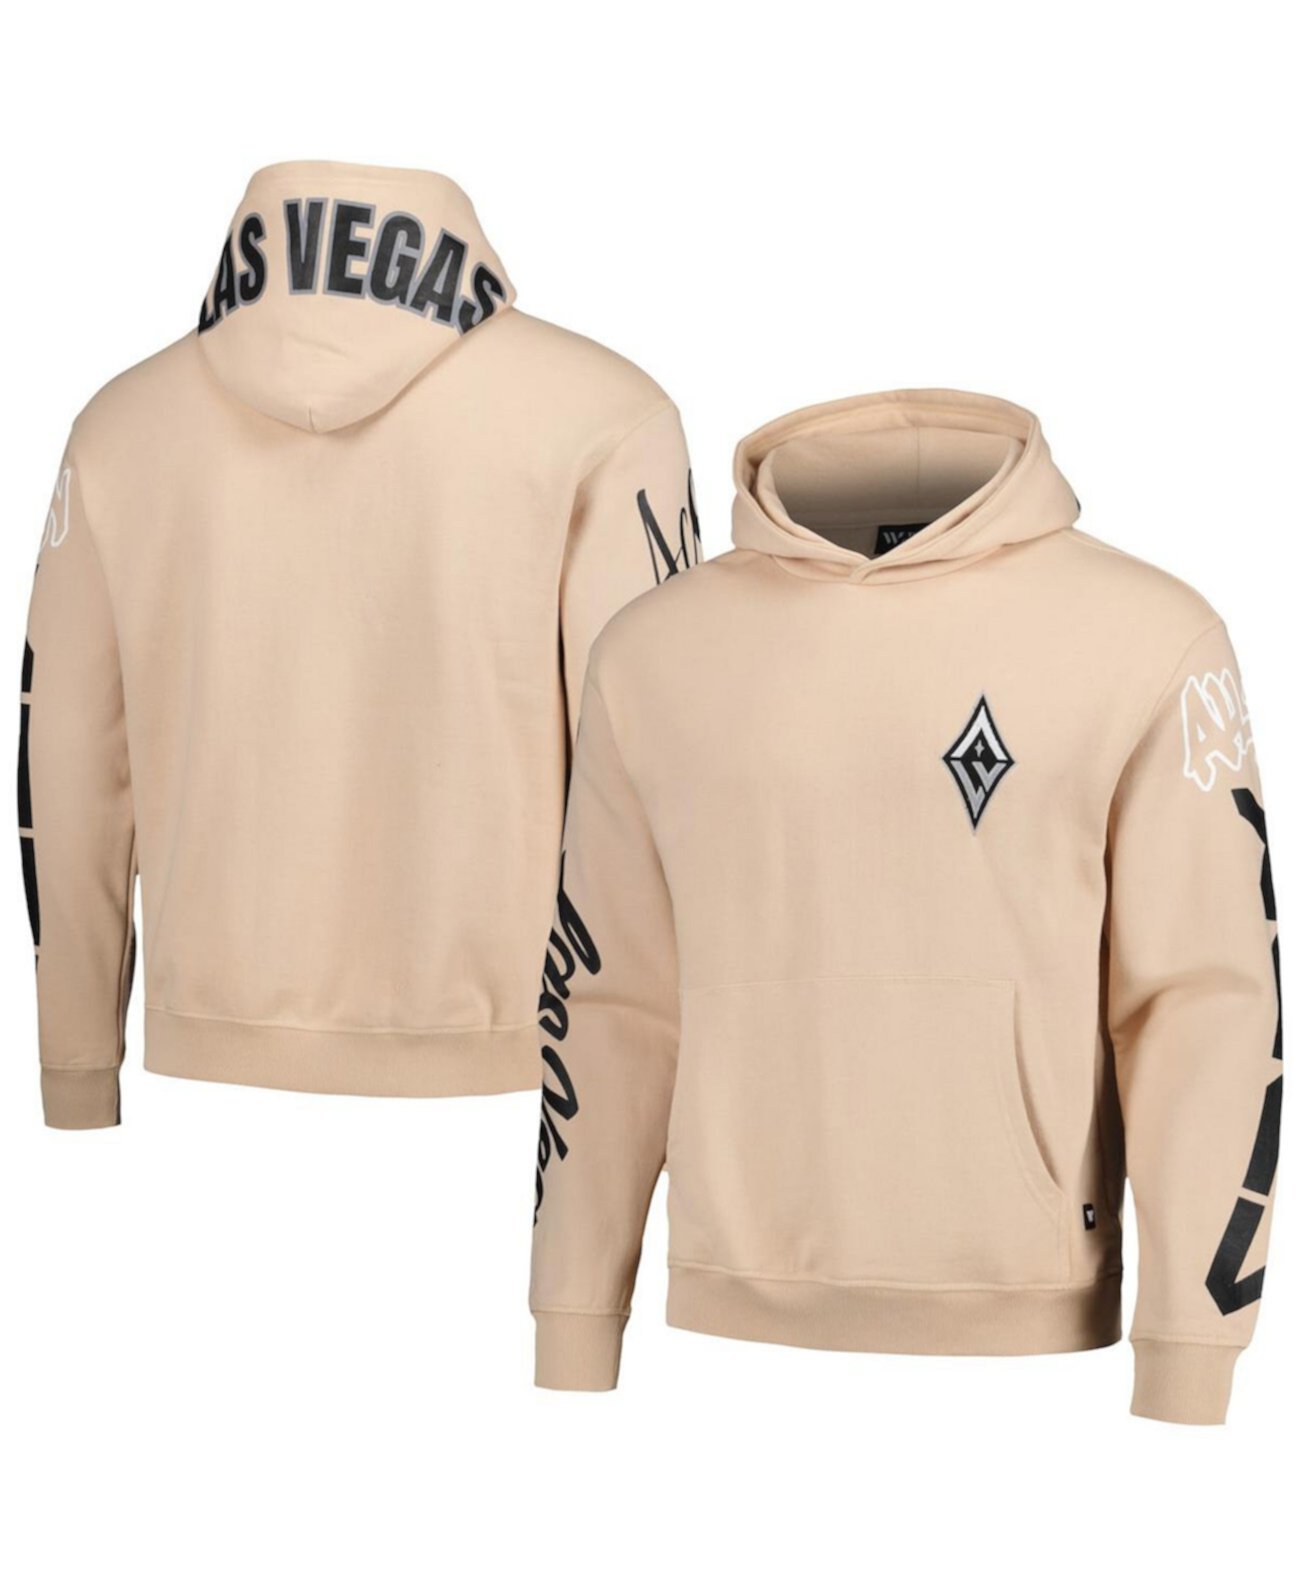 Men's and Women's Tan Las Vegas Aces Graffiti Acid Wash Pullover Hoodie The Wild Collective